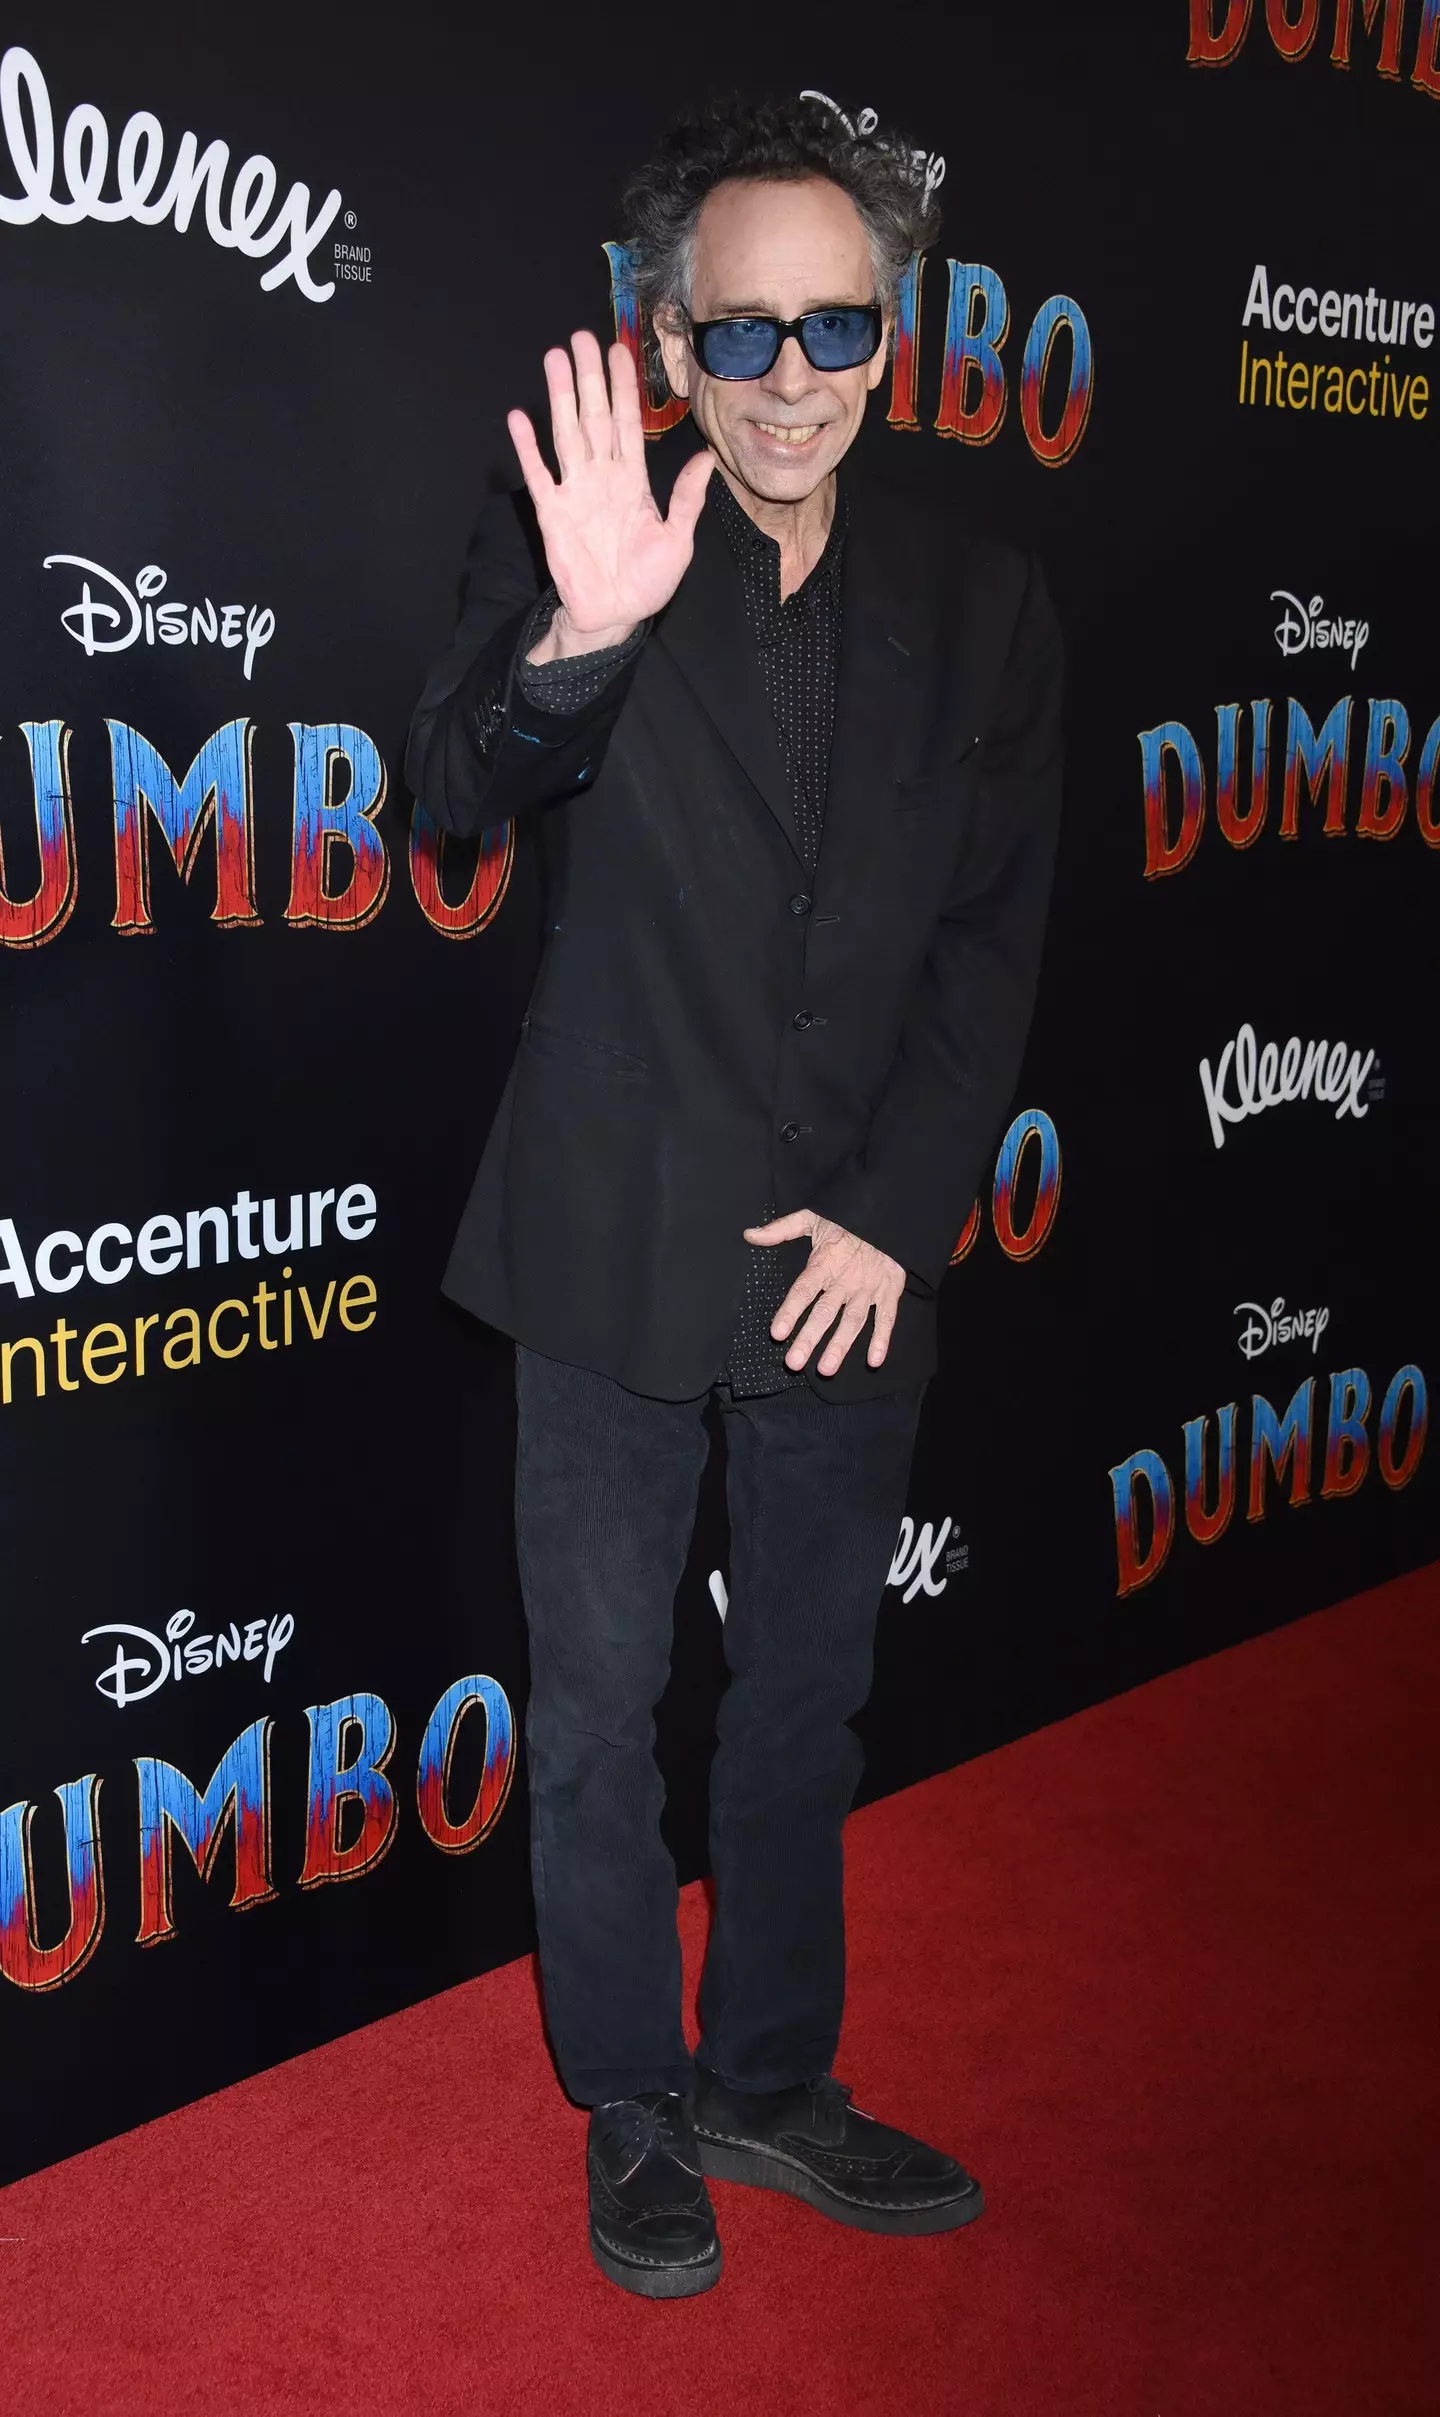 Tim Burton says he is stepping away from Disney following Dumbo.